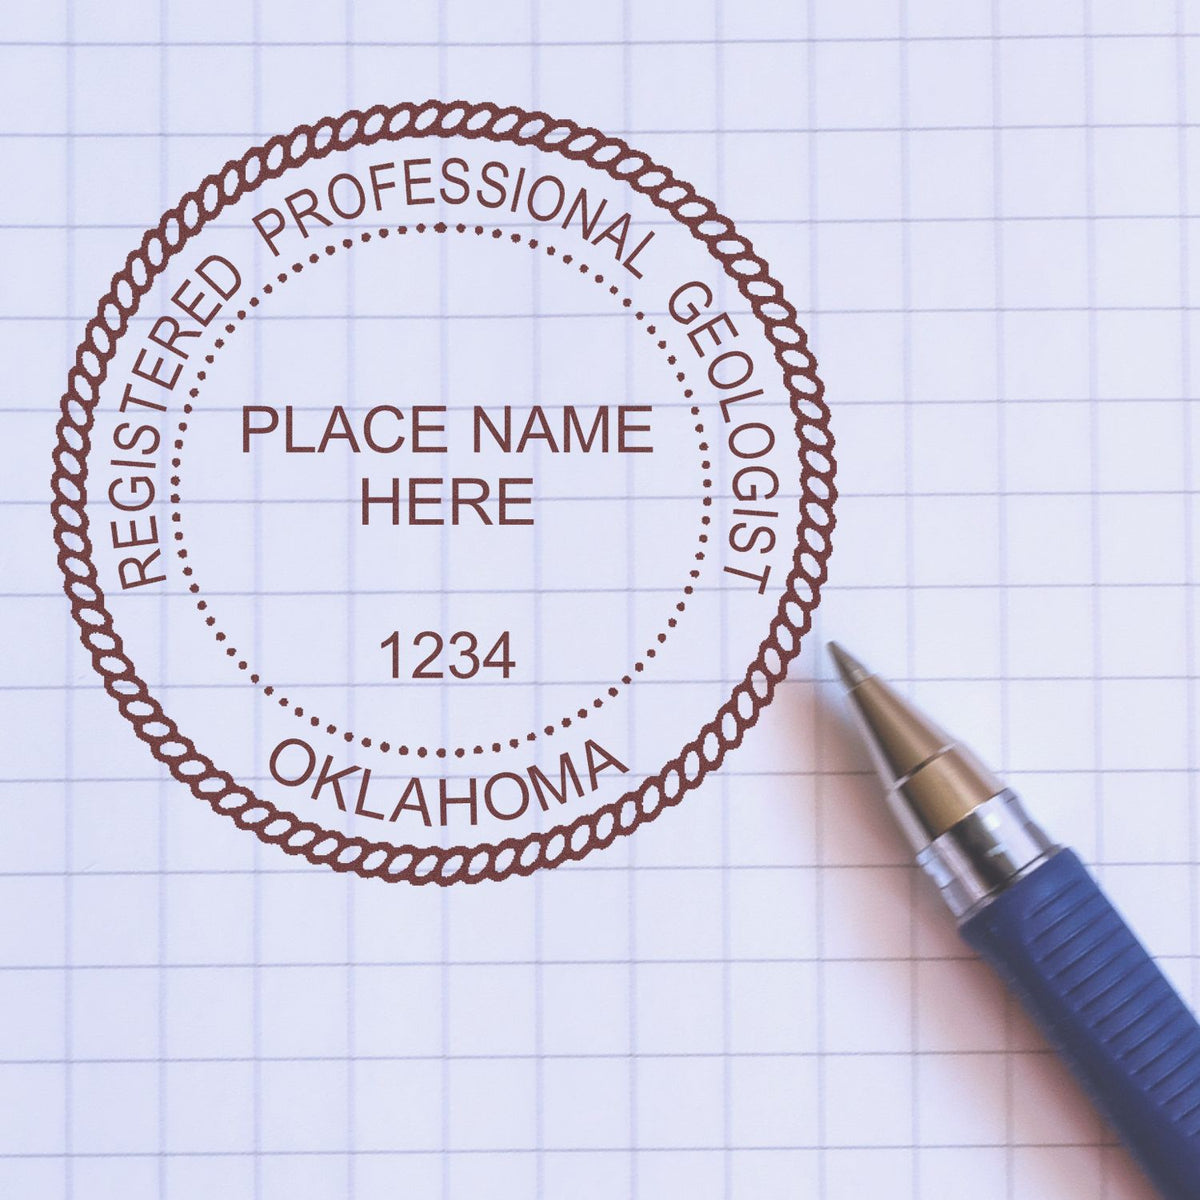 Another Example of a stamped impression of the Slim Pre-Inked Oklahoma Professional Geologist Seal Stamp on a office form